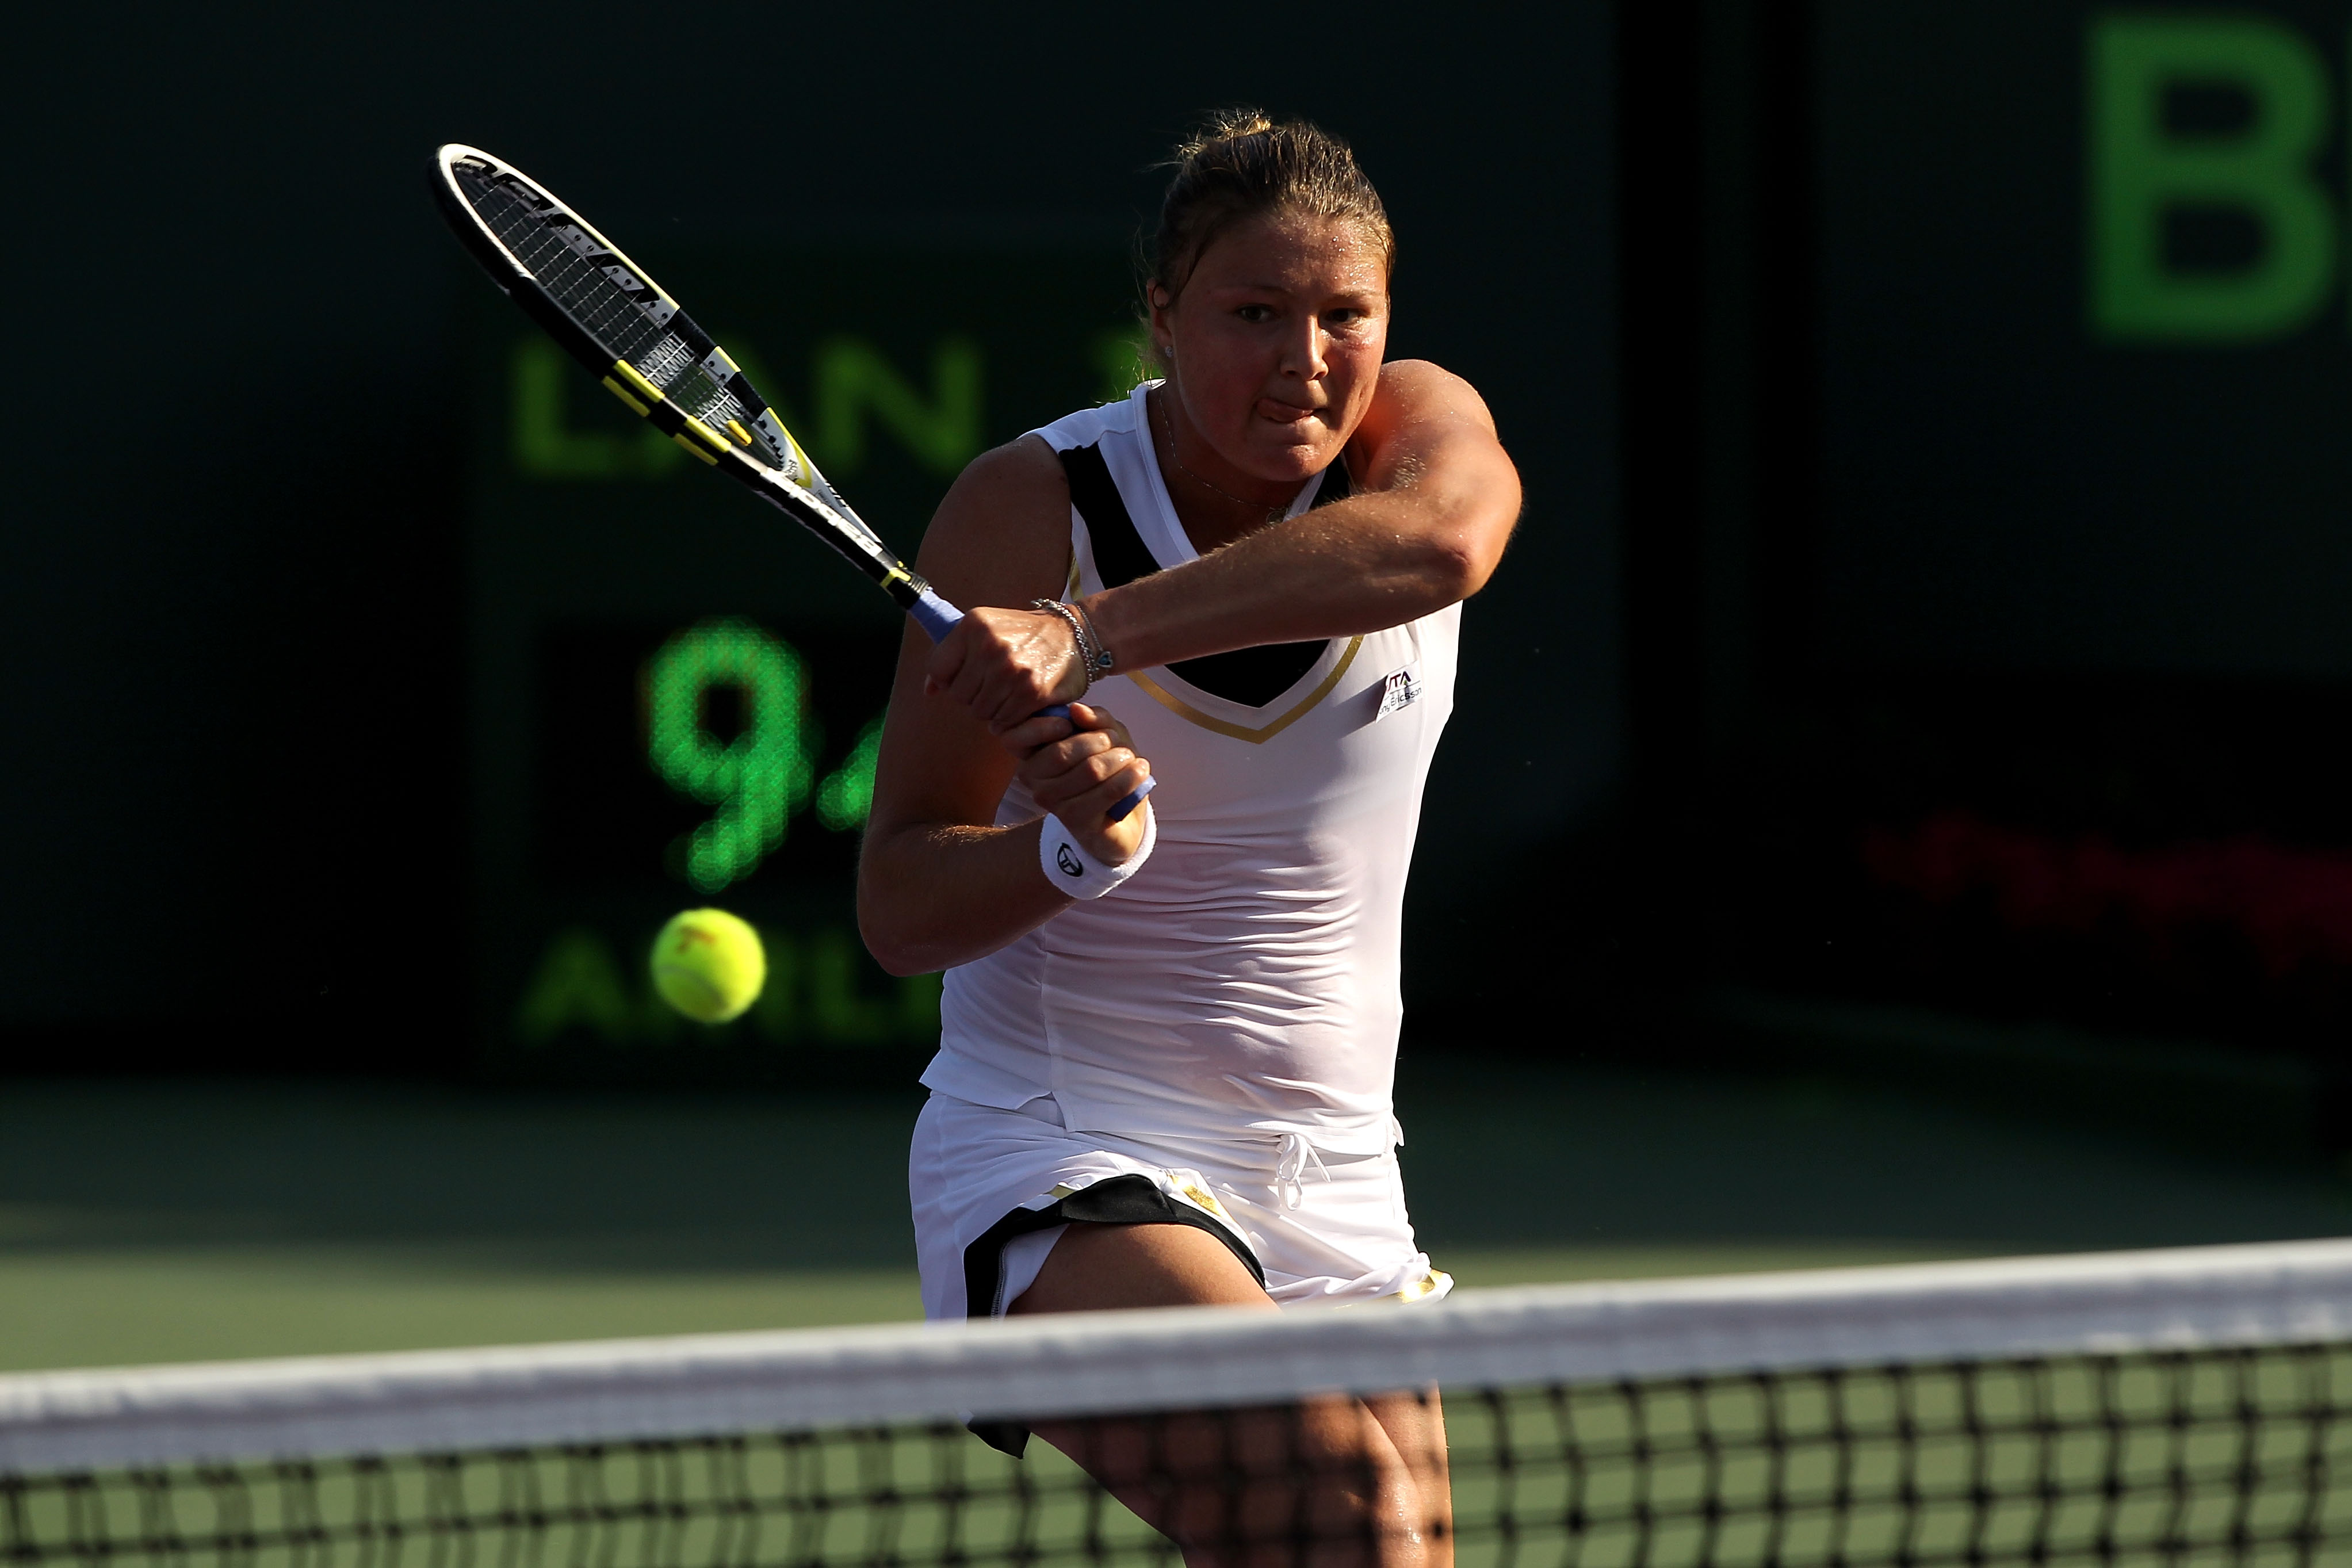 KEY BISCAYNE, FL - MARCH 25:  Dinara Safina of Russia follows through on a return against Vera Zvonareva of Russia during the Sony Ericsson Open at Crandon Park Tennis Center on March 25, 2011 in Key Biscayne, Florida.  (Photo by Al Bello/Getty Images)